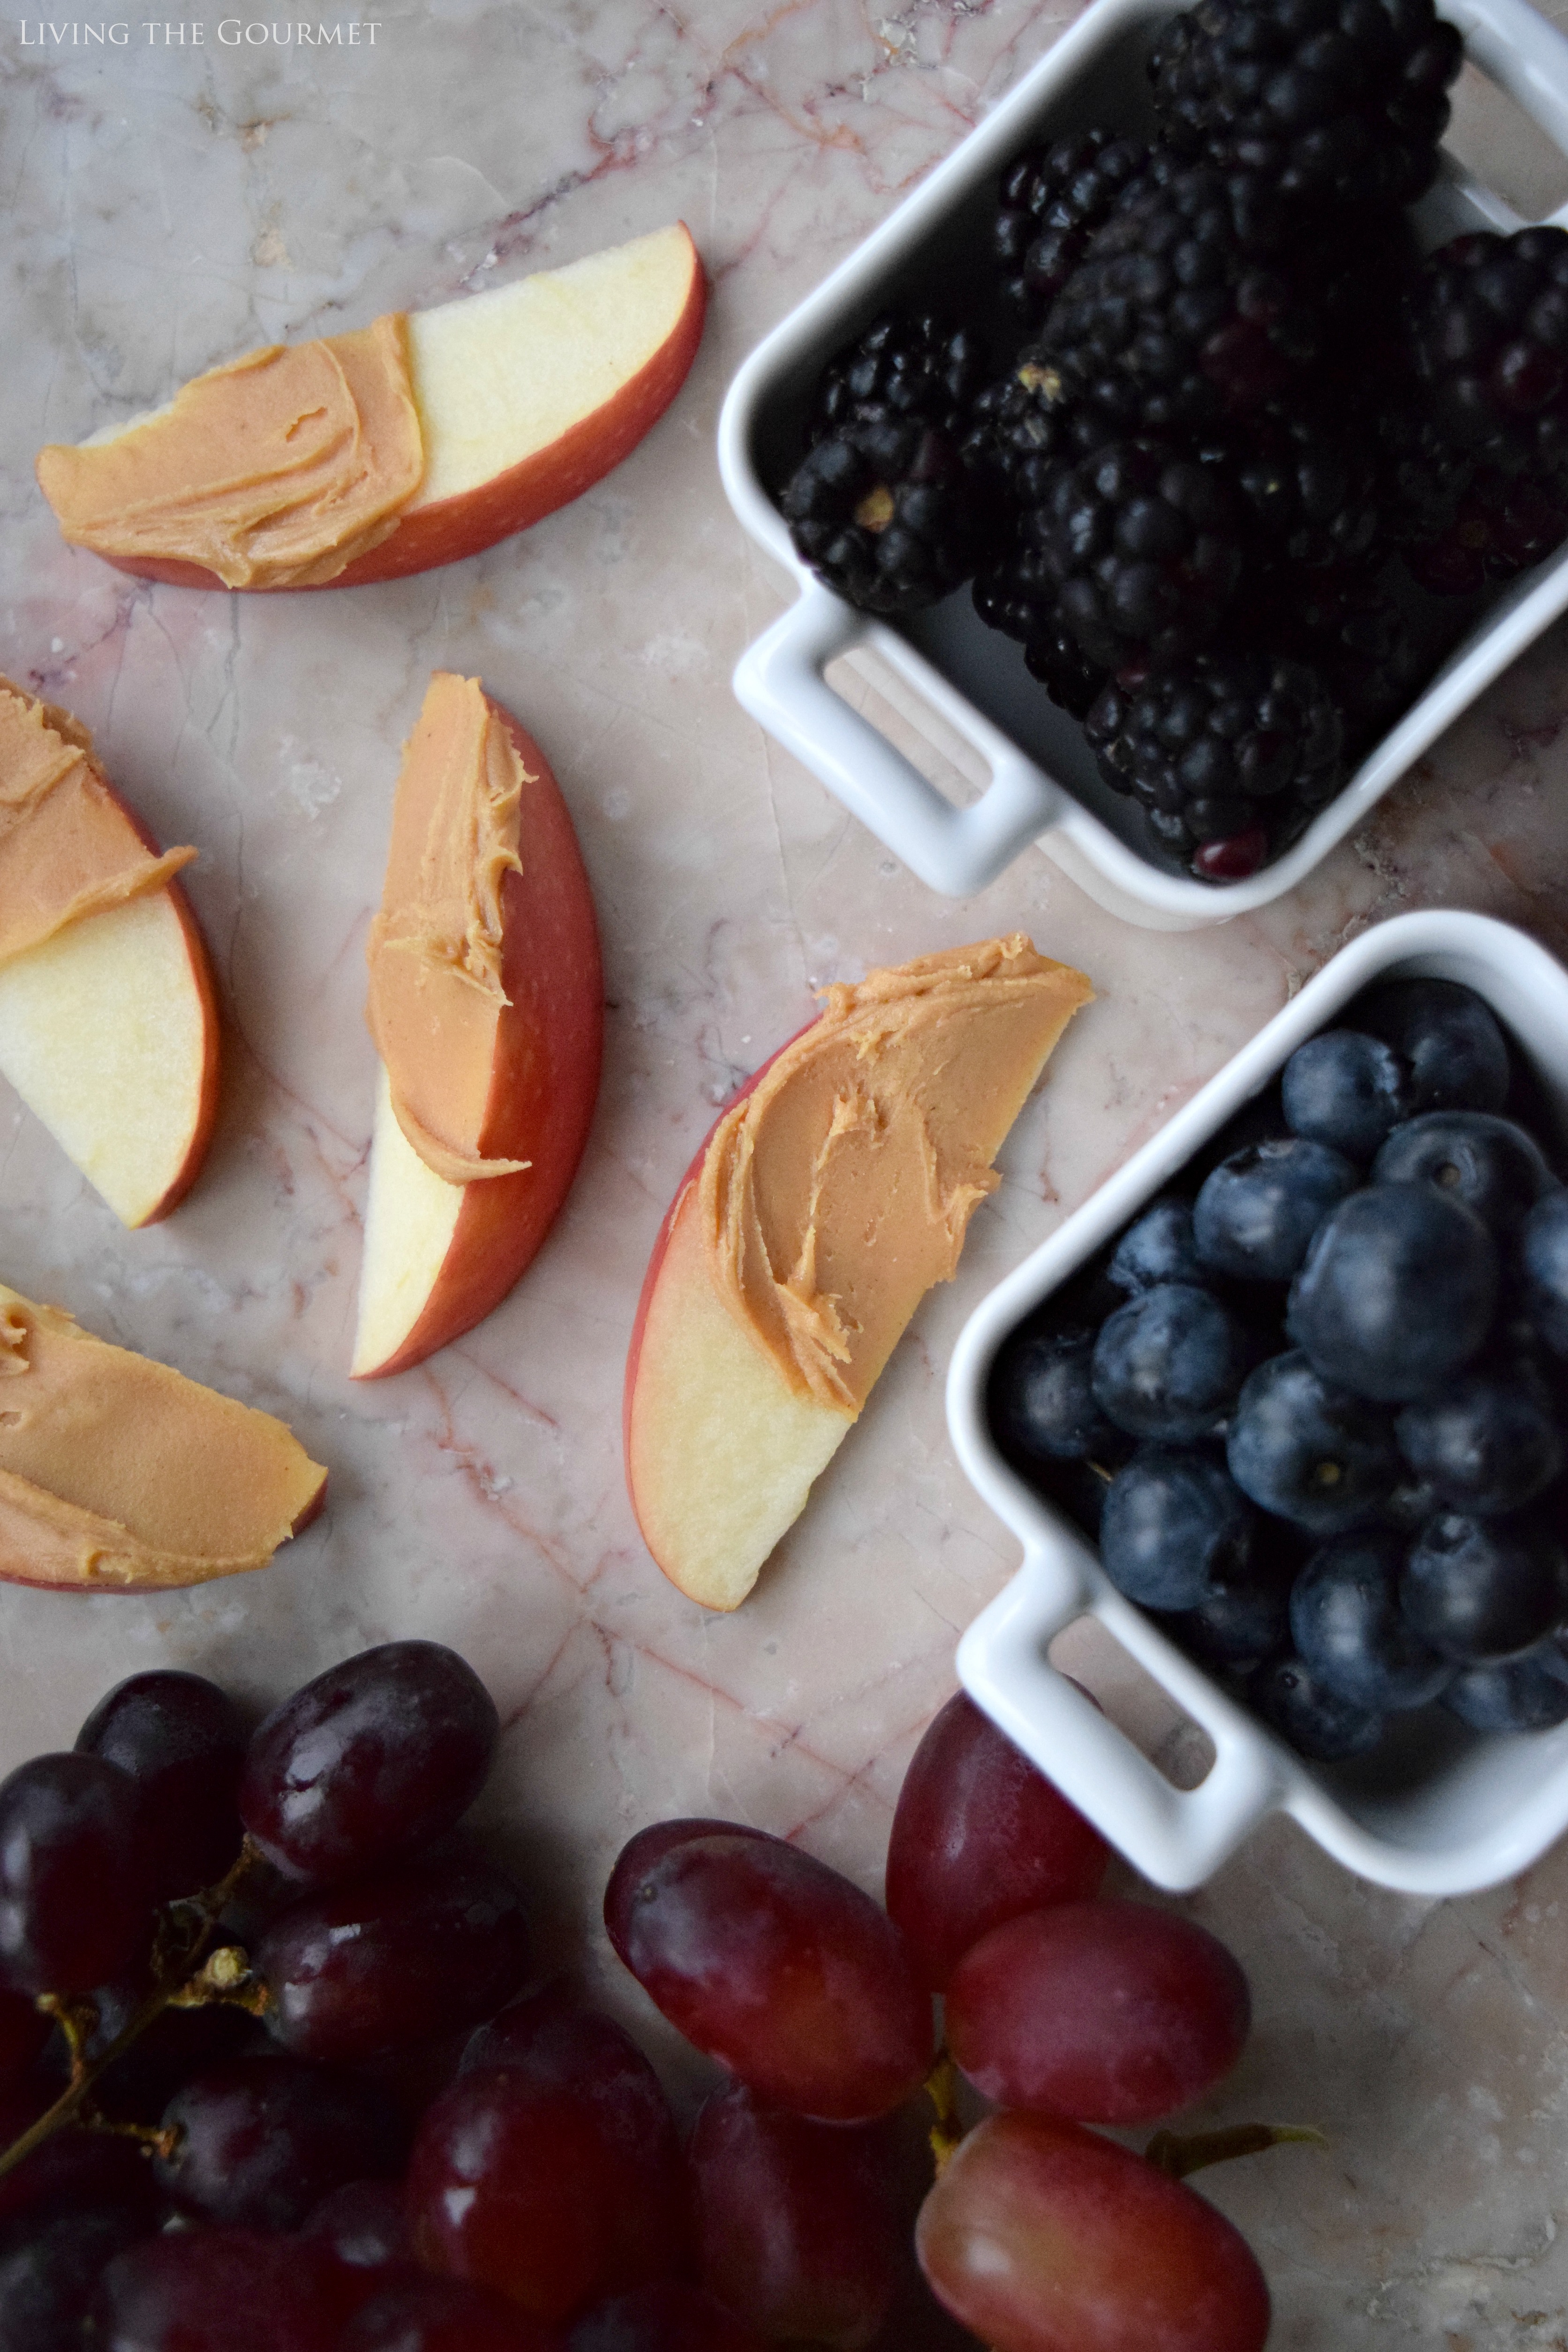 Living the Gourmet: 8 Healthy Snack Ideas to Sneak Into Your Workplace